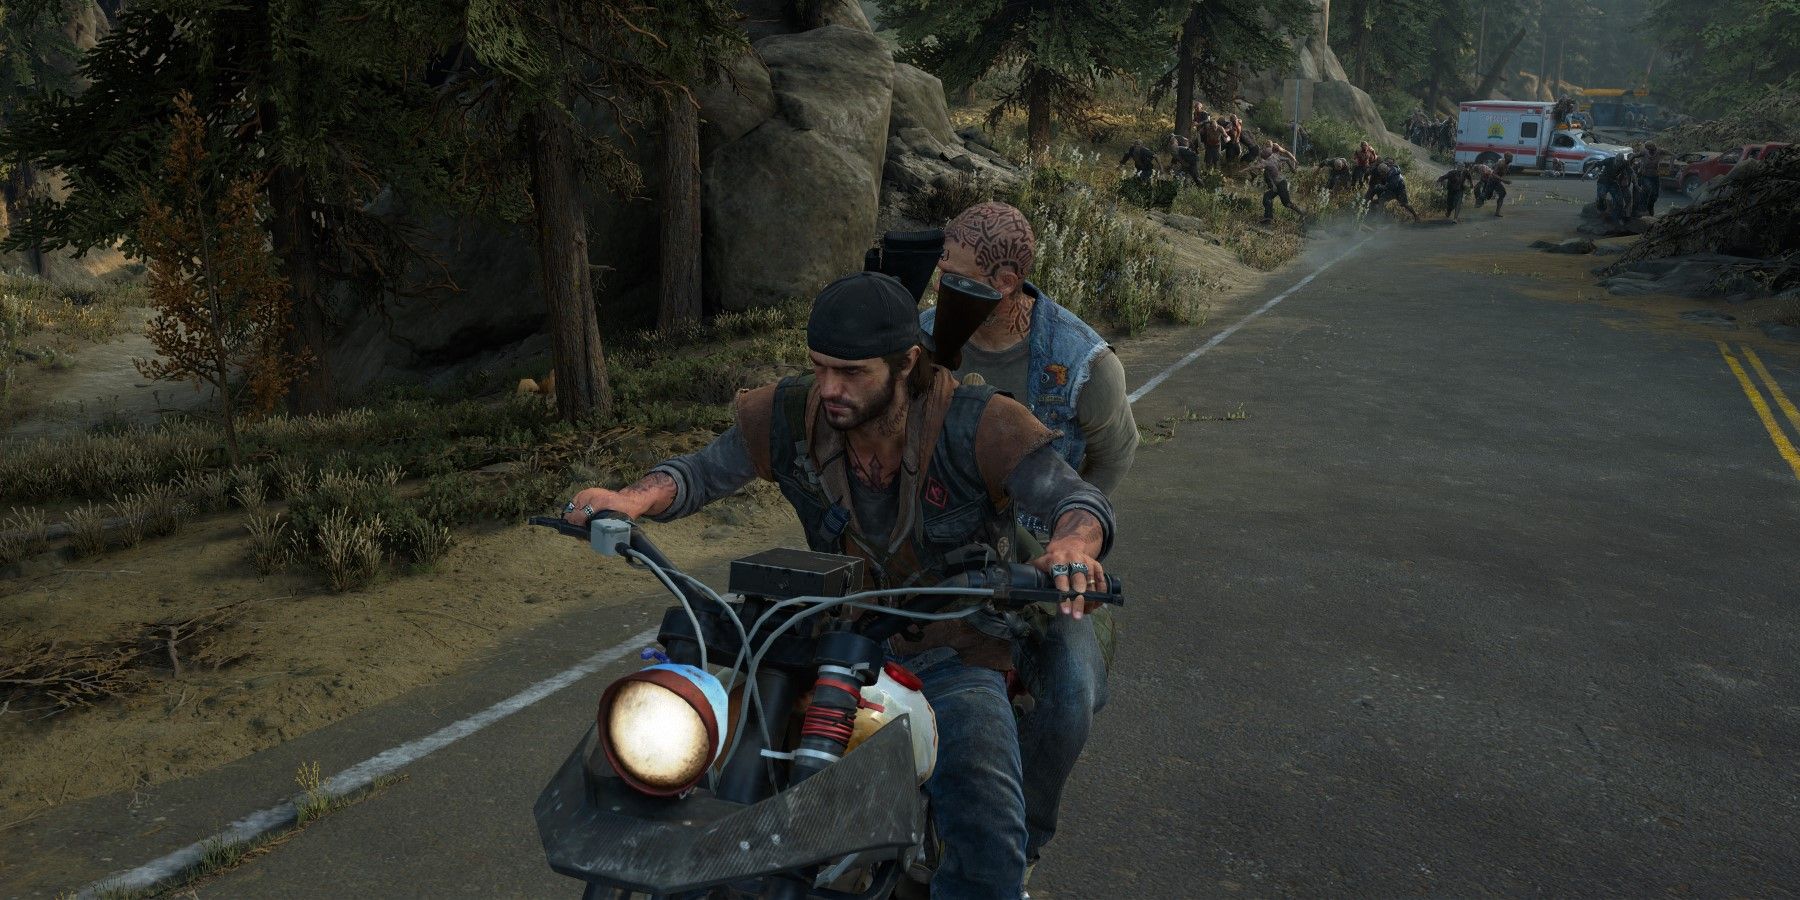 Blakwoodz on X: Days Gone 2 devs Bend Studio is working on something  Juicy. 2025 we are getting it, Check out the video. We got all the info  gathered up about Bend